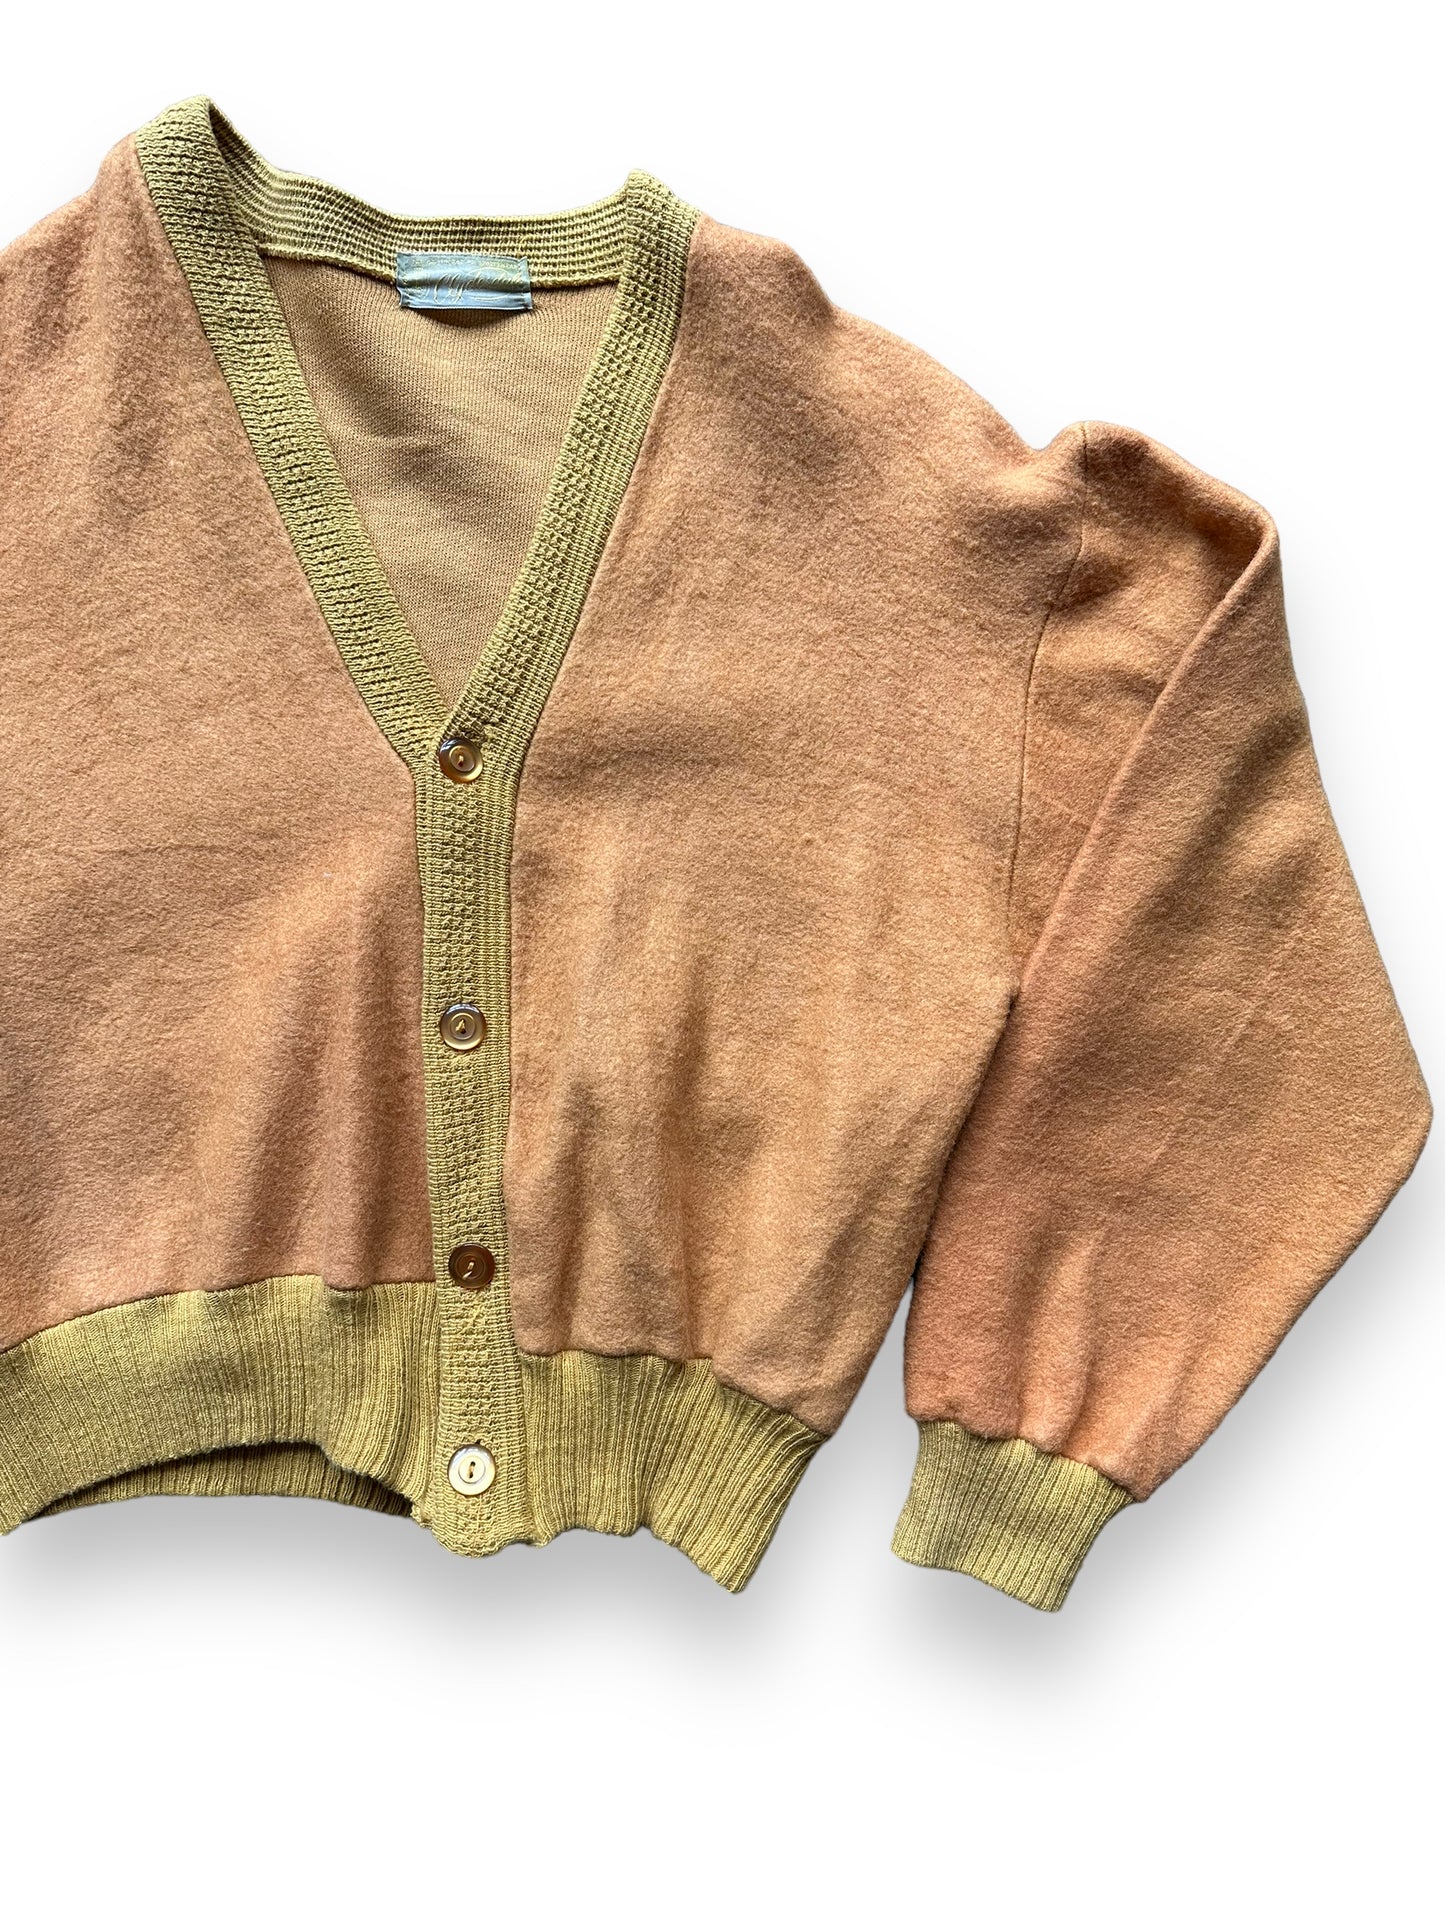 Front Left View of Vintage 1930s Clydesdale Cardigan SZ L | Vintage Cardigan Sweaters | Vintage Clothing Seattle